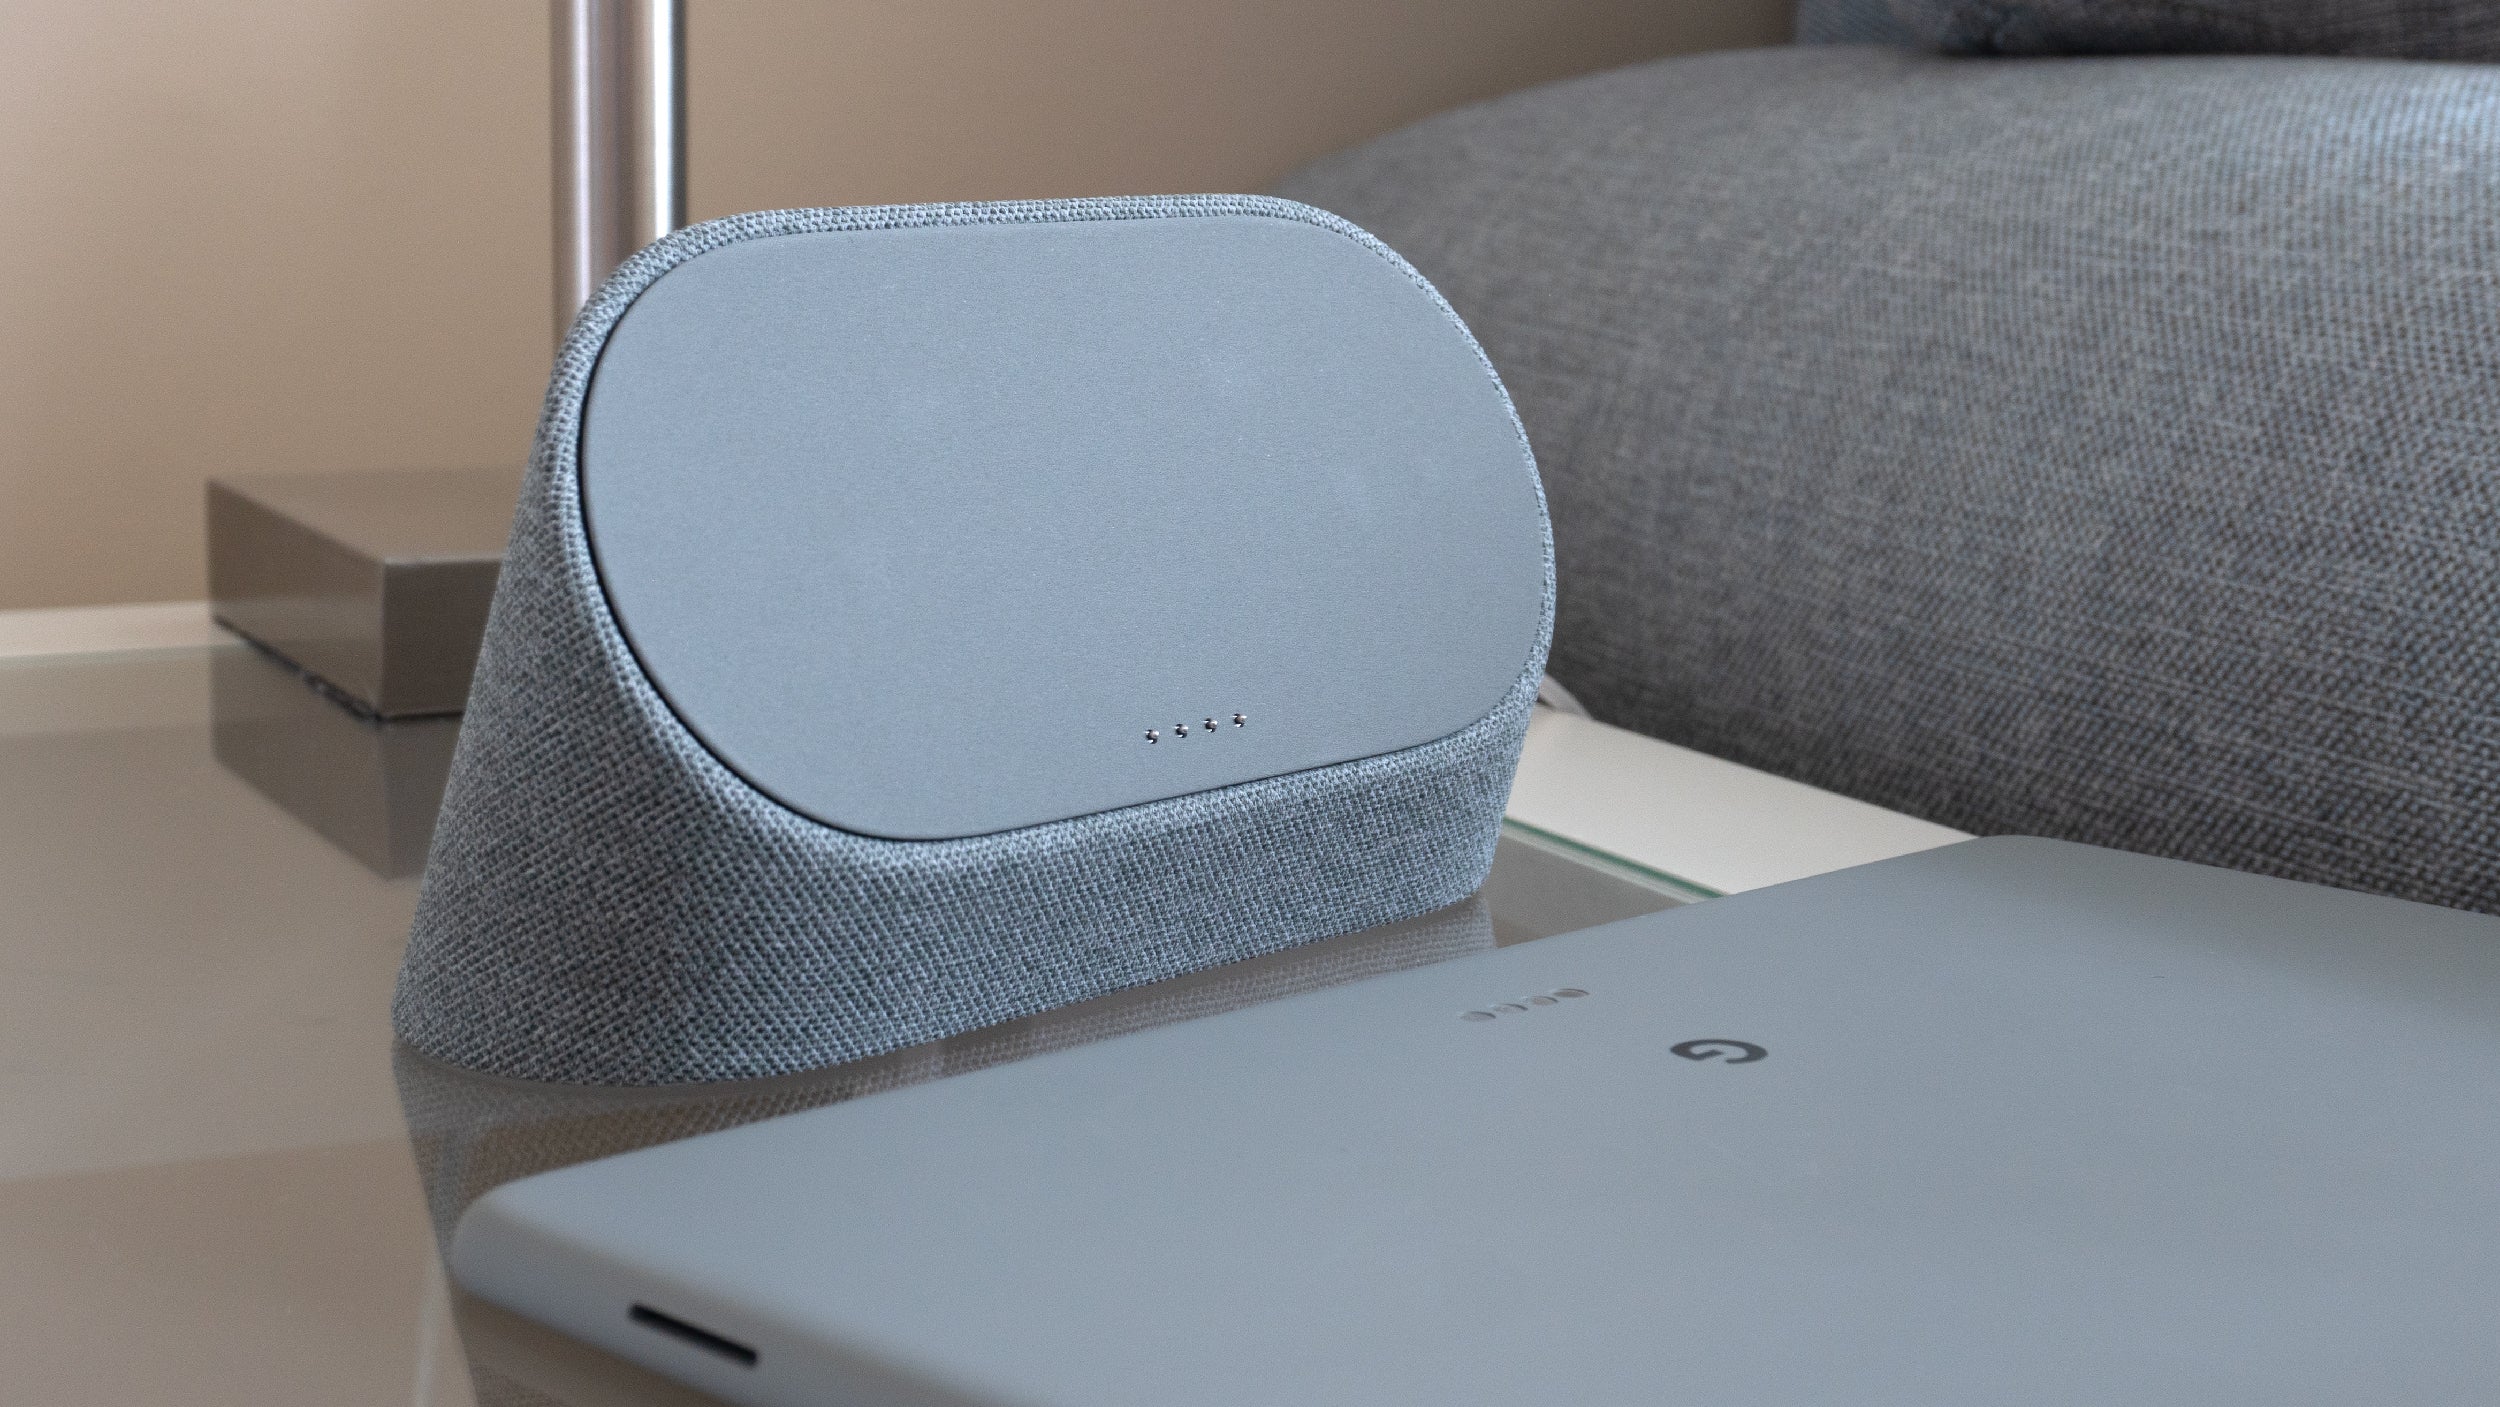 The Pixel Tablet connects to its dock with strong magnets, while four metal pins provide charging and data transfer connections. (Photo: Andrew Liszewski | Gizmodo)